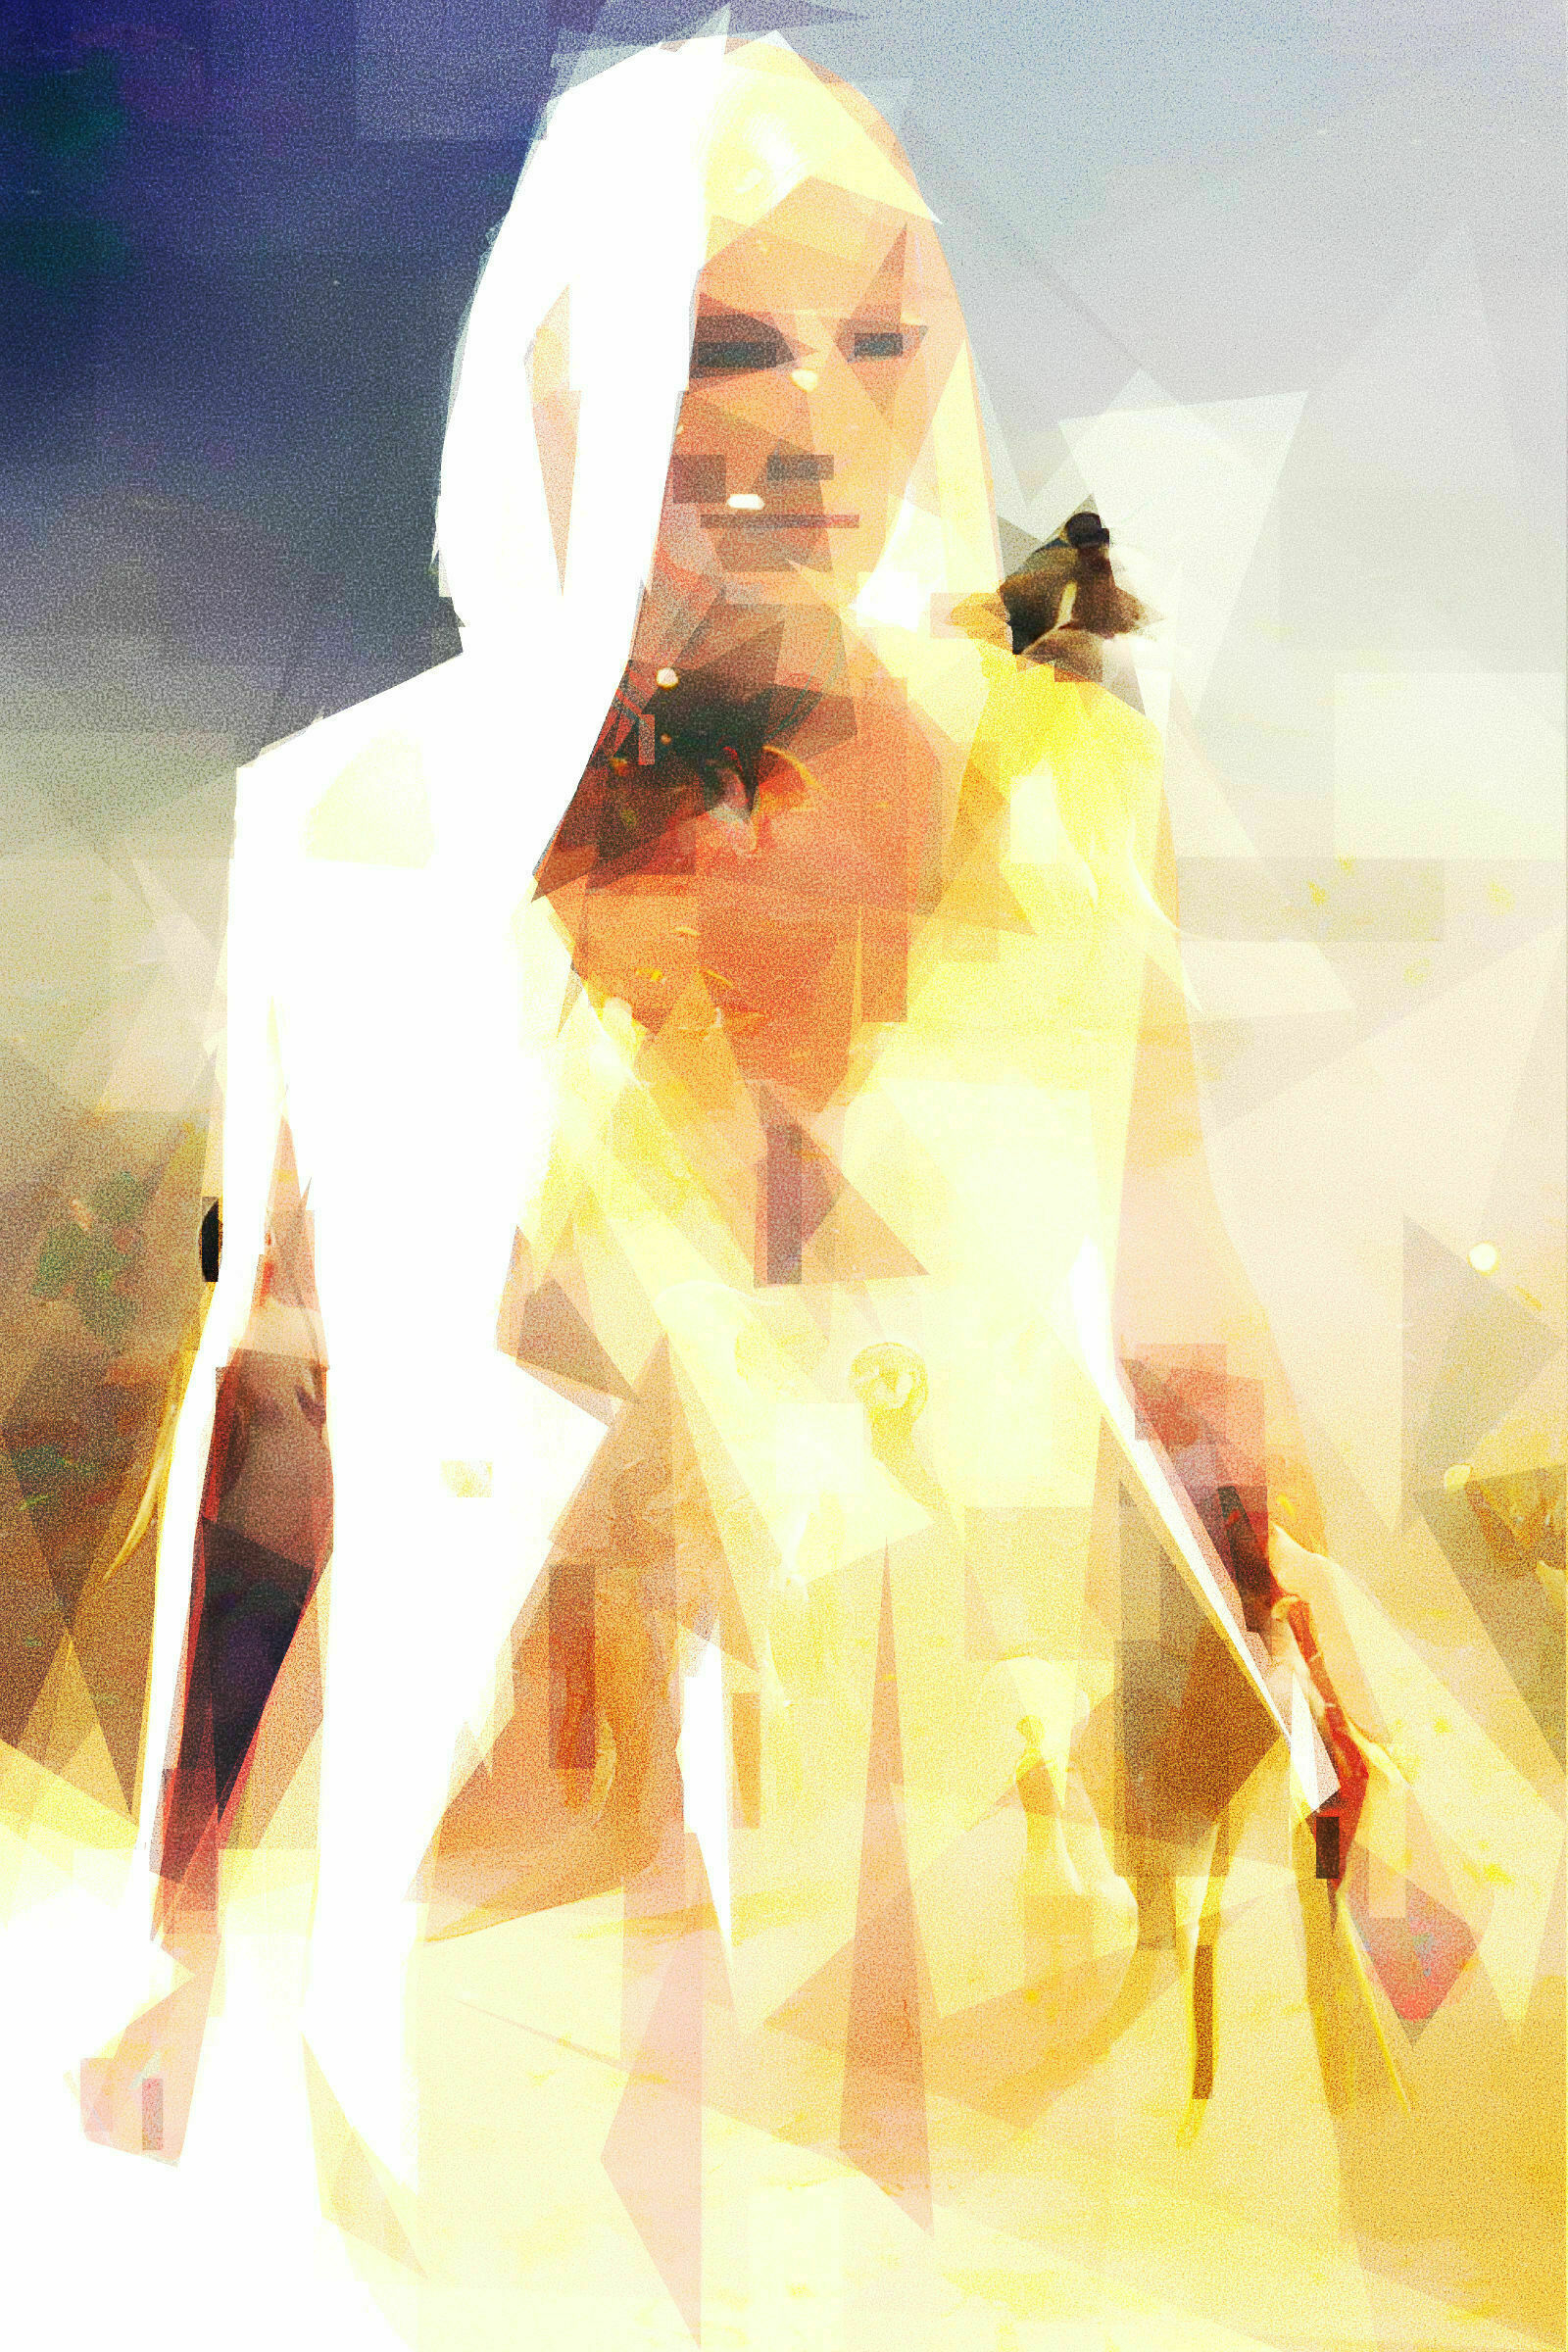 A very abstract representation of a woman in a hooded robe